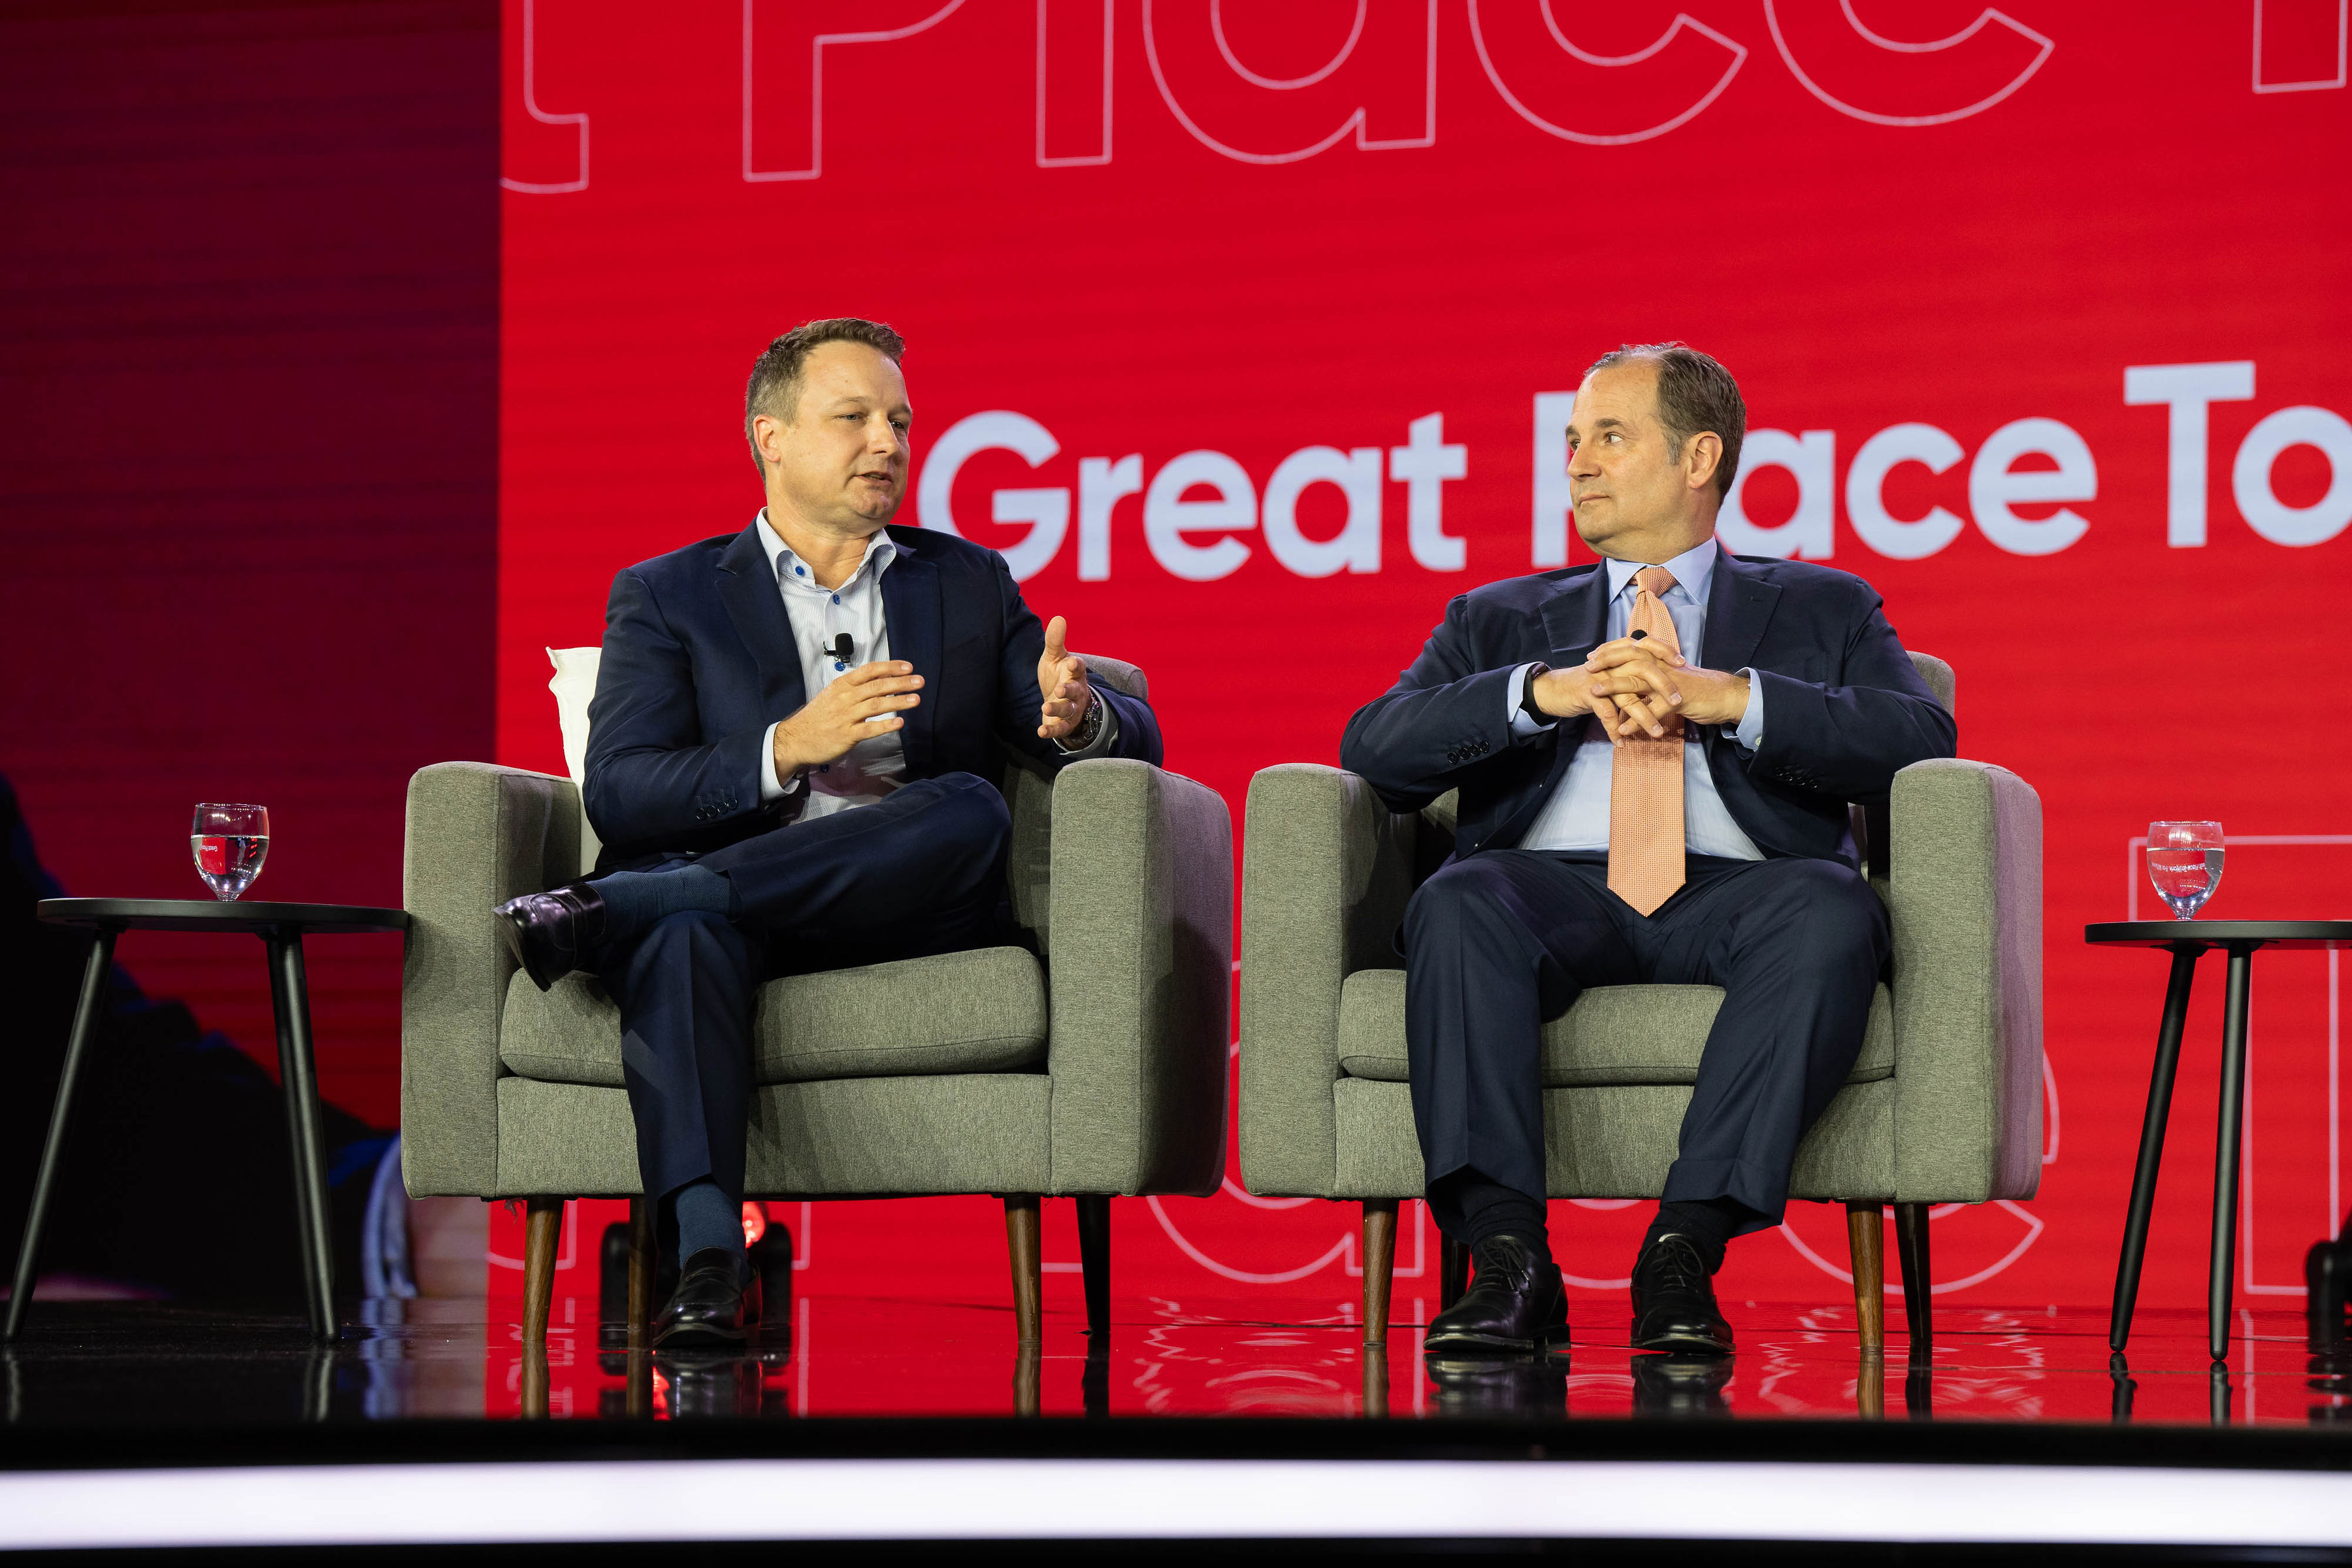 Anthony Capuano, CEO, Marriott International and Ty Breland, CHRO, Marriott International